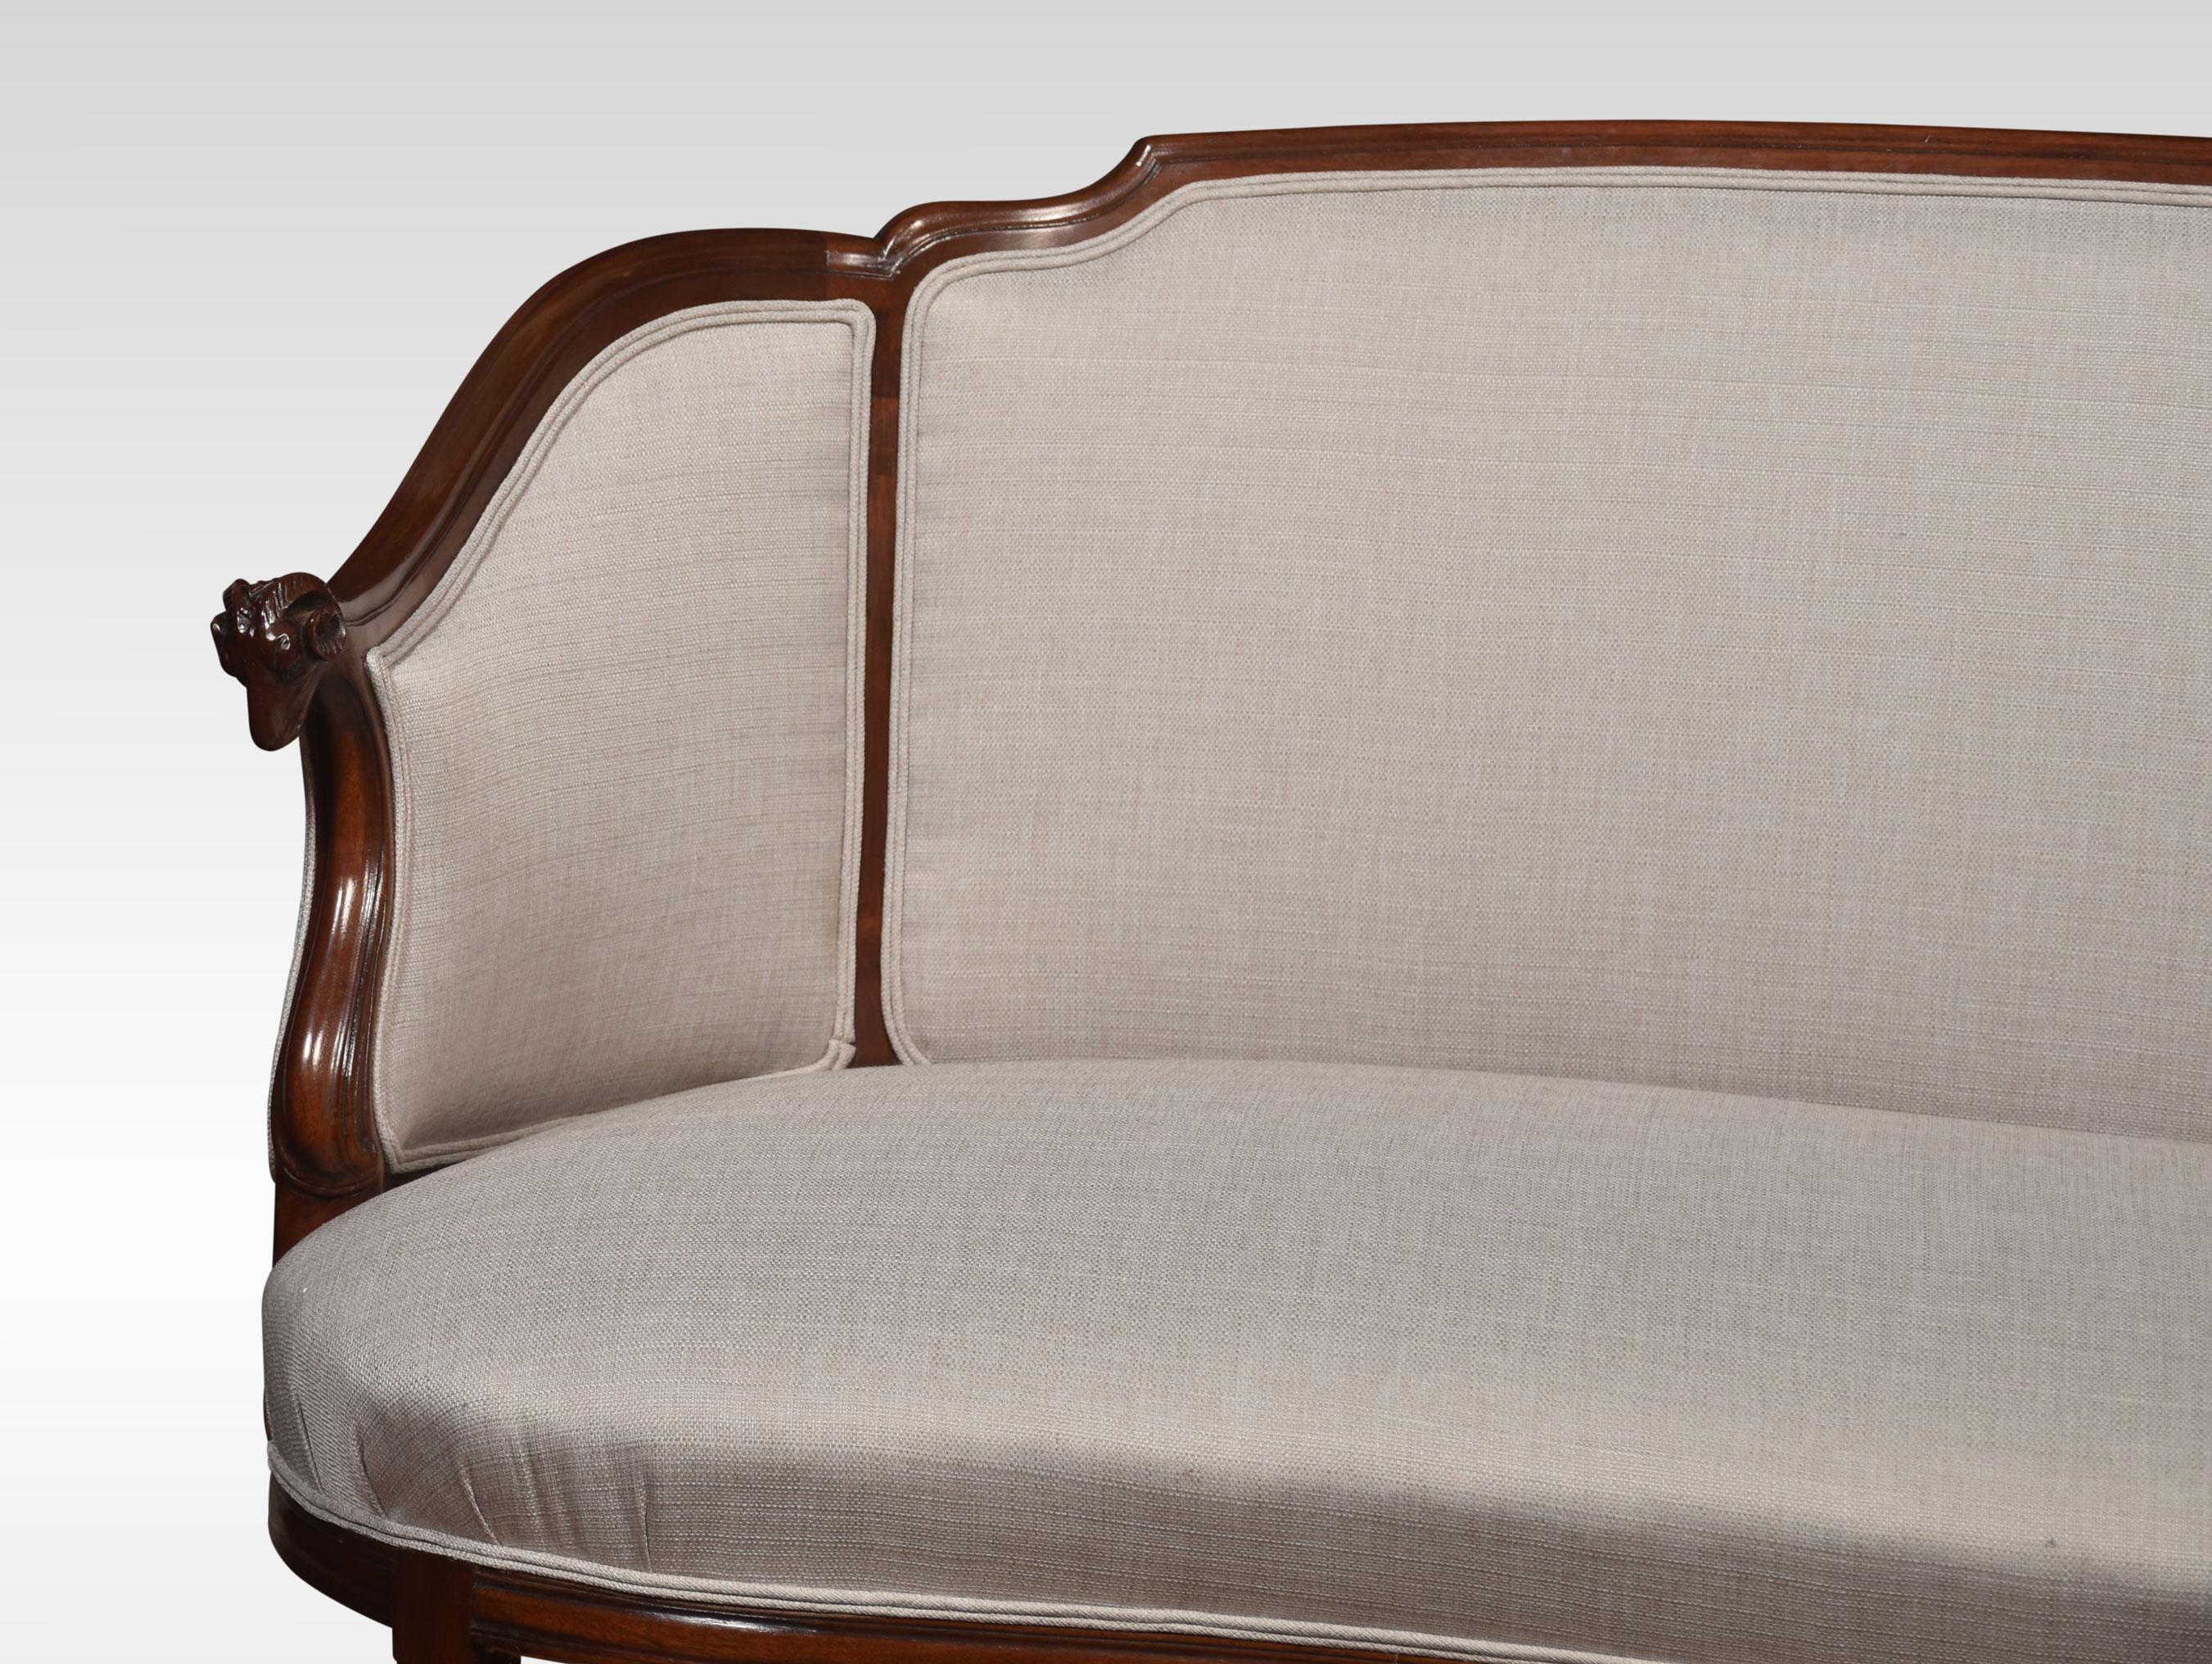 Walnut framed two-seater settee the shaped top rail above upholstered back and seat enclosed by outswept rams headed arms. All raised up on tapering legs.
Dimensions
Height 37 Inches height to seat 18 Inches
Width 56.5 Inches
Depth 28 Inches.